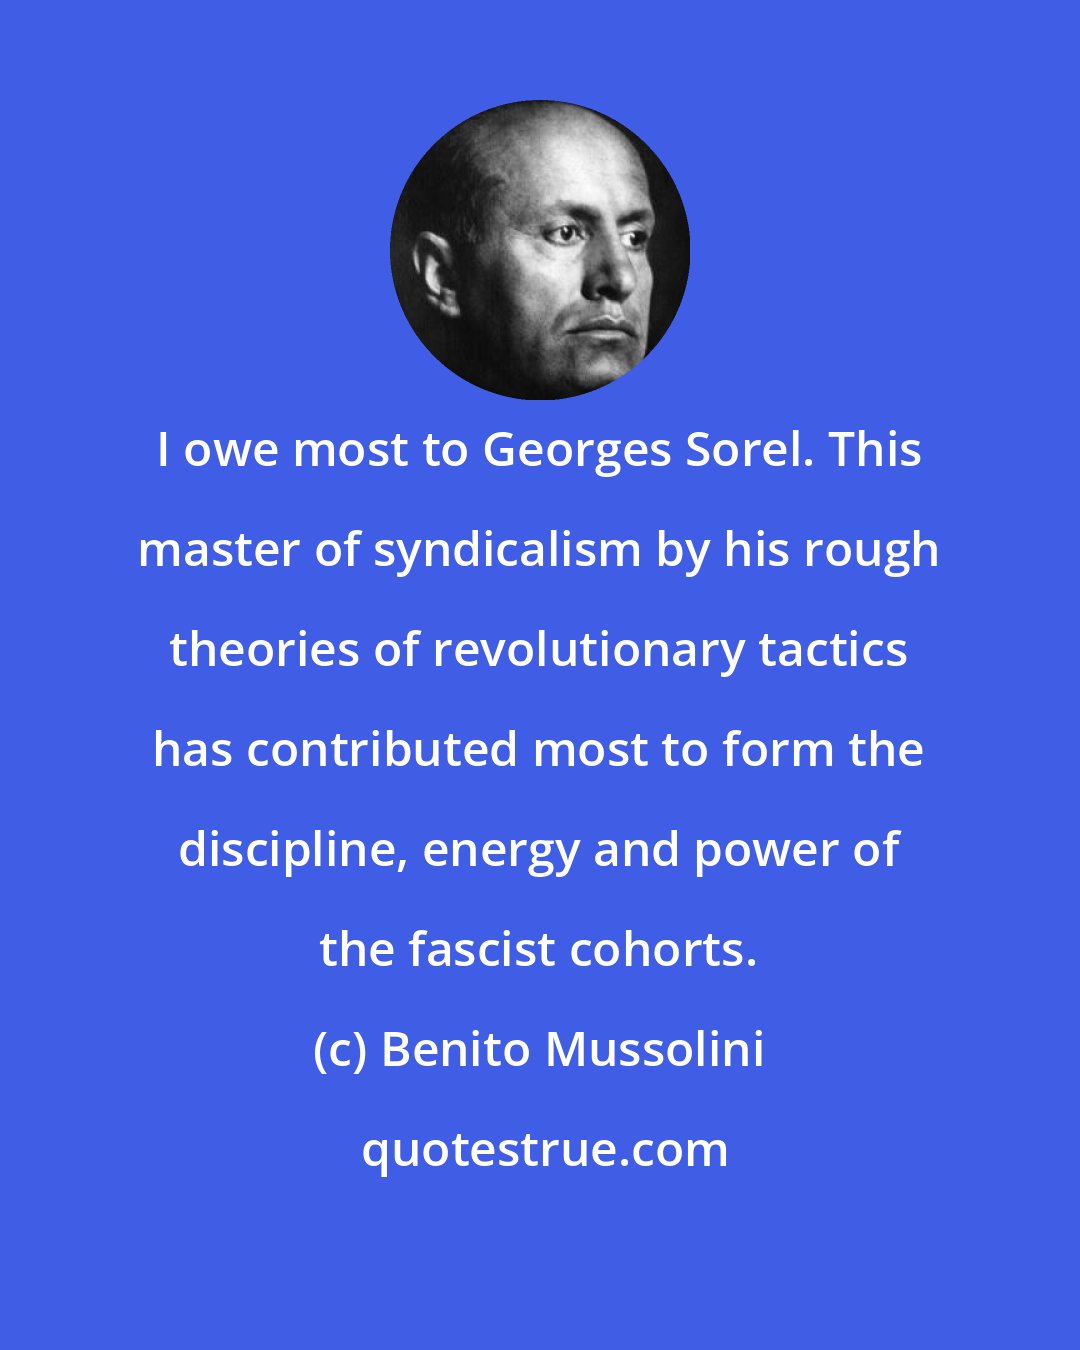 Benito Mussolini: I owe most to Georges Sorel. This master of syndicalism by his rough theories of revolutionary tactics has contributed most to form the discipline, energy and power of the fascist cohorts.